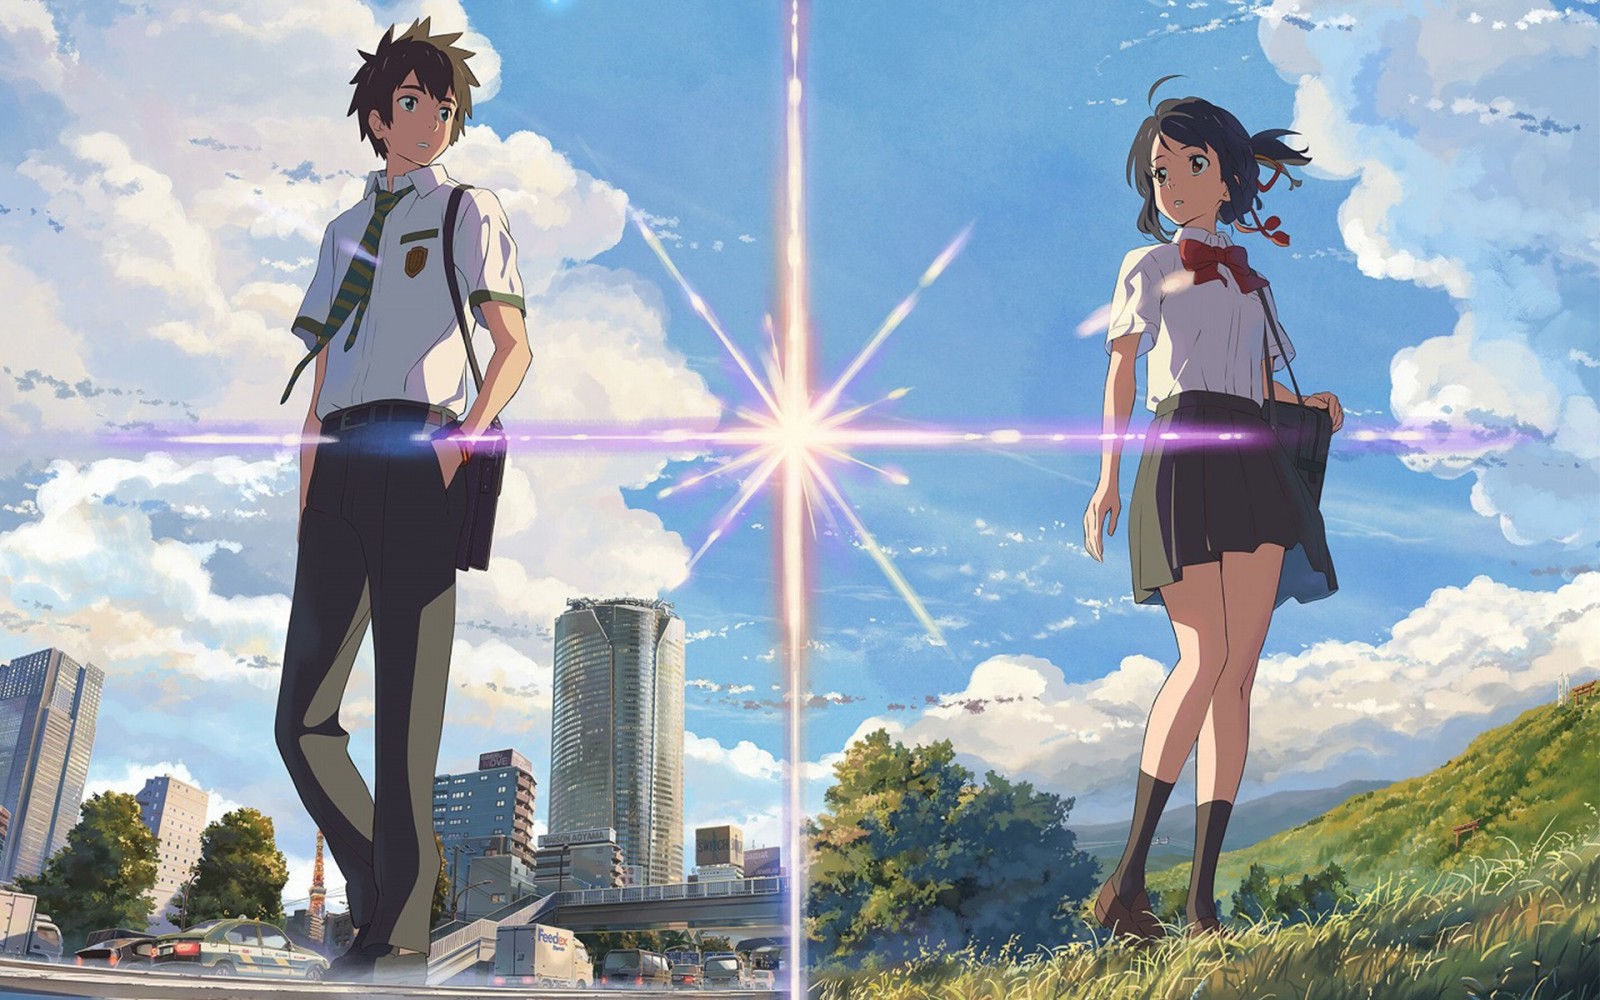 Your Name, the fifth highest grossing movie in Japan